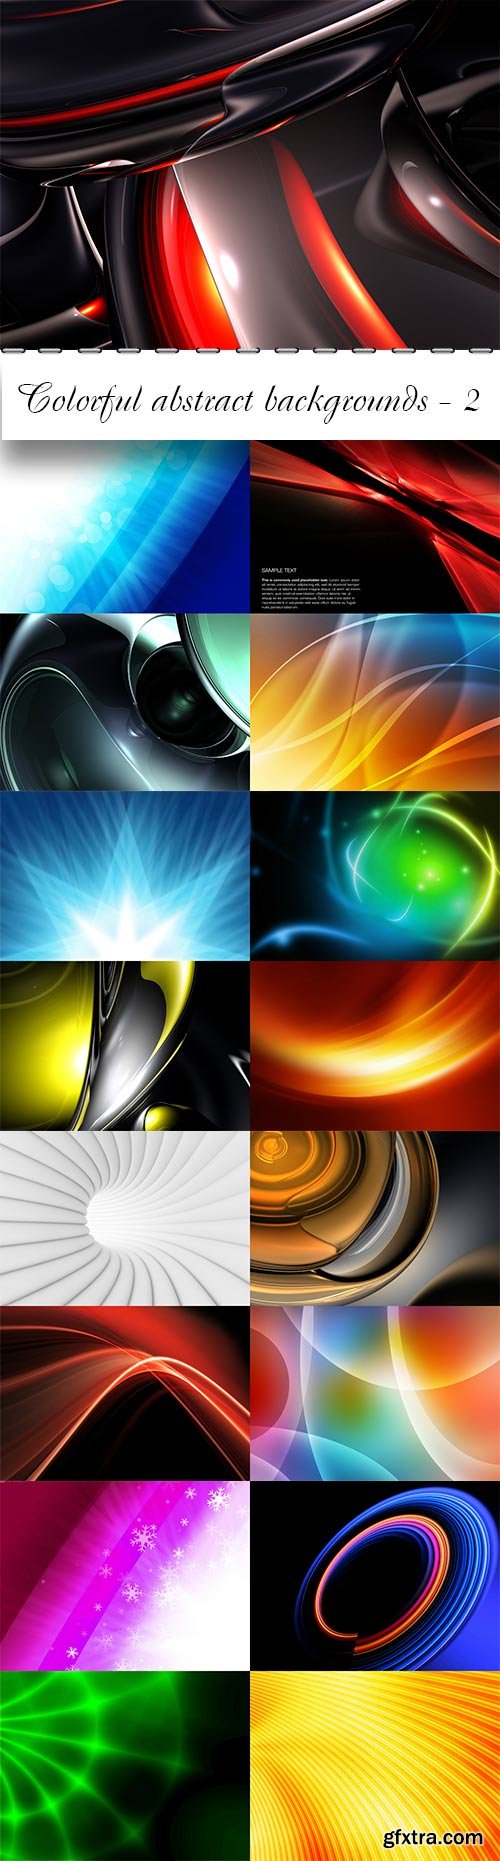 Colorful abstract backgrounds - 2